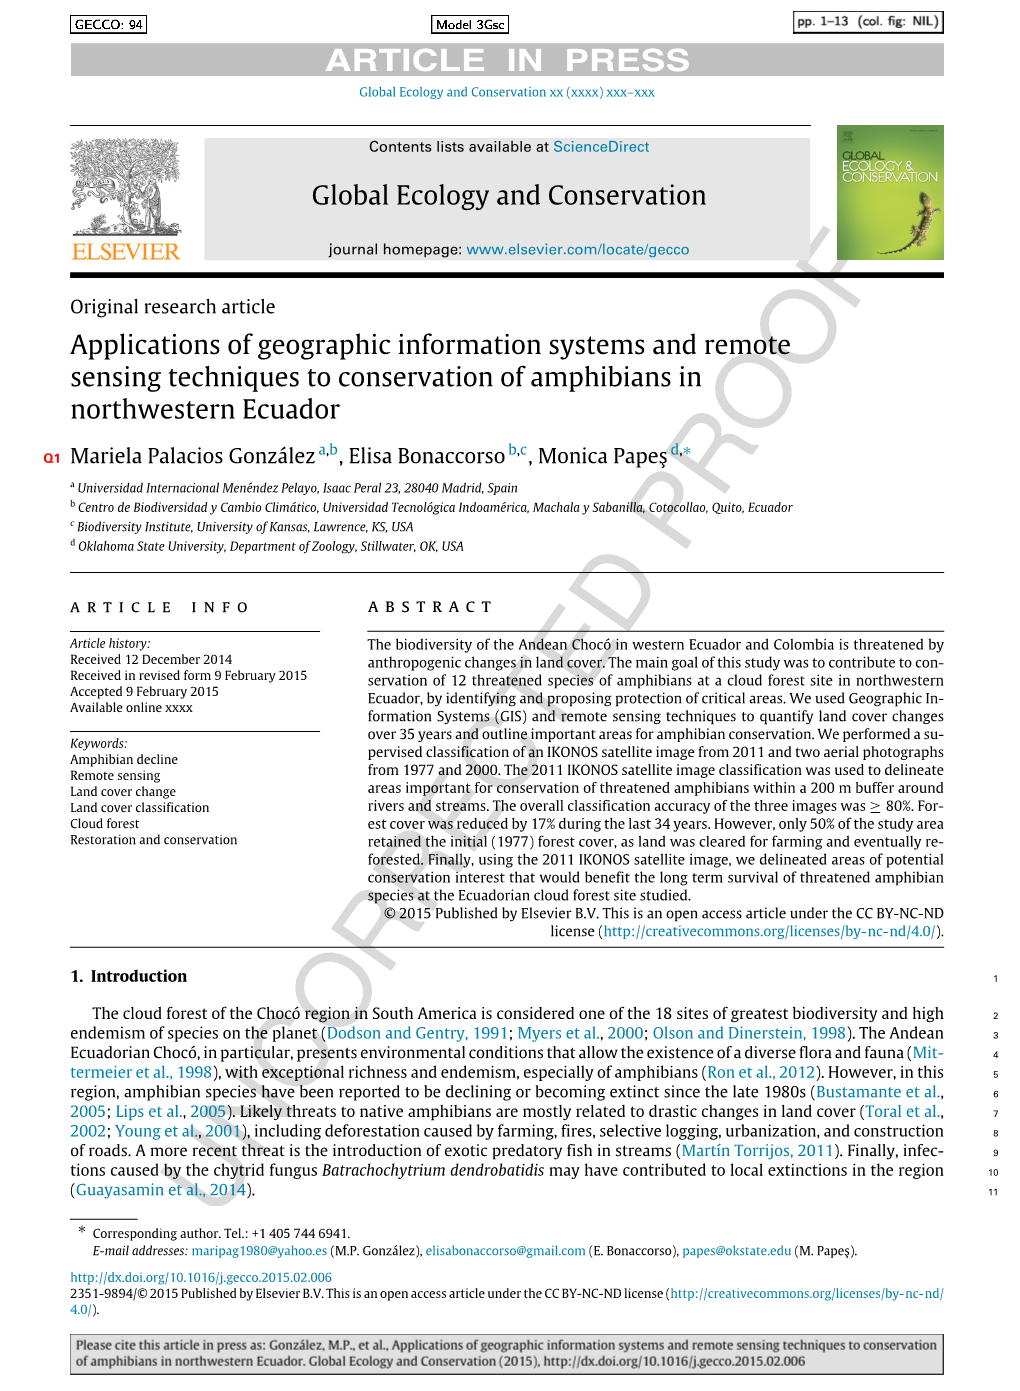 Applications of Geographic Information Systems and Remote Sensing Techniques to Conservation of Amphibians in Northwestern Ecuador